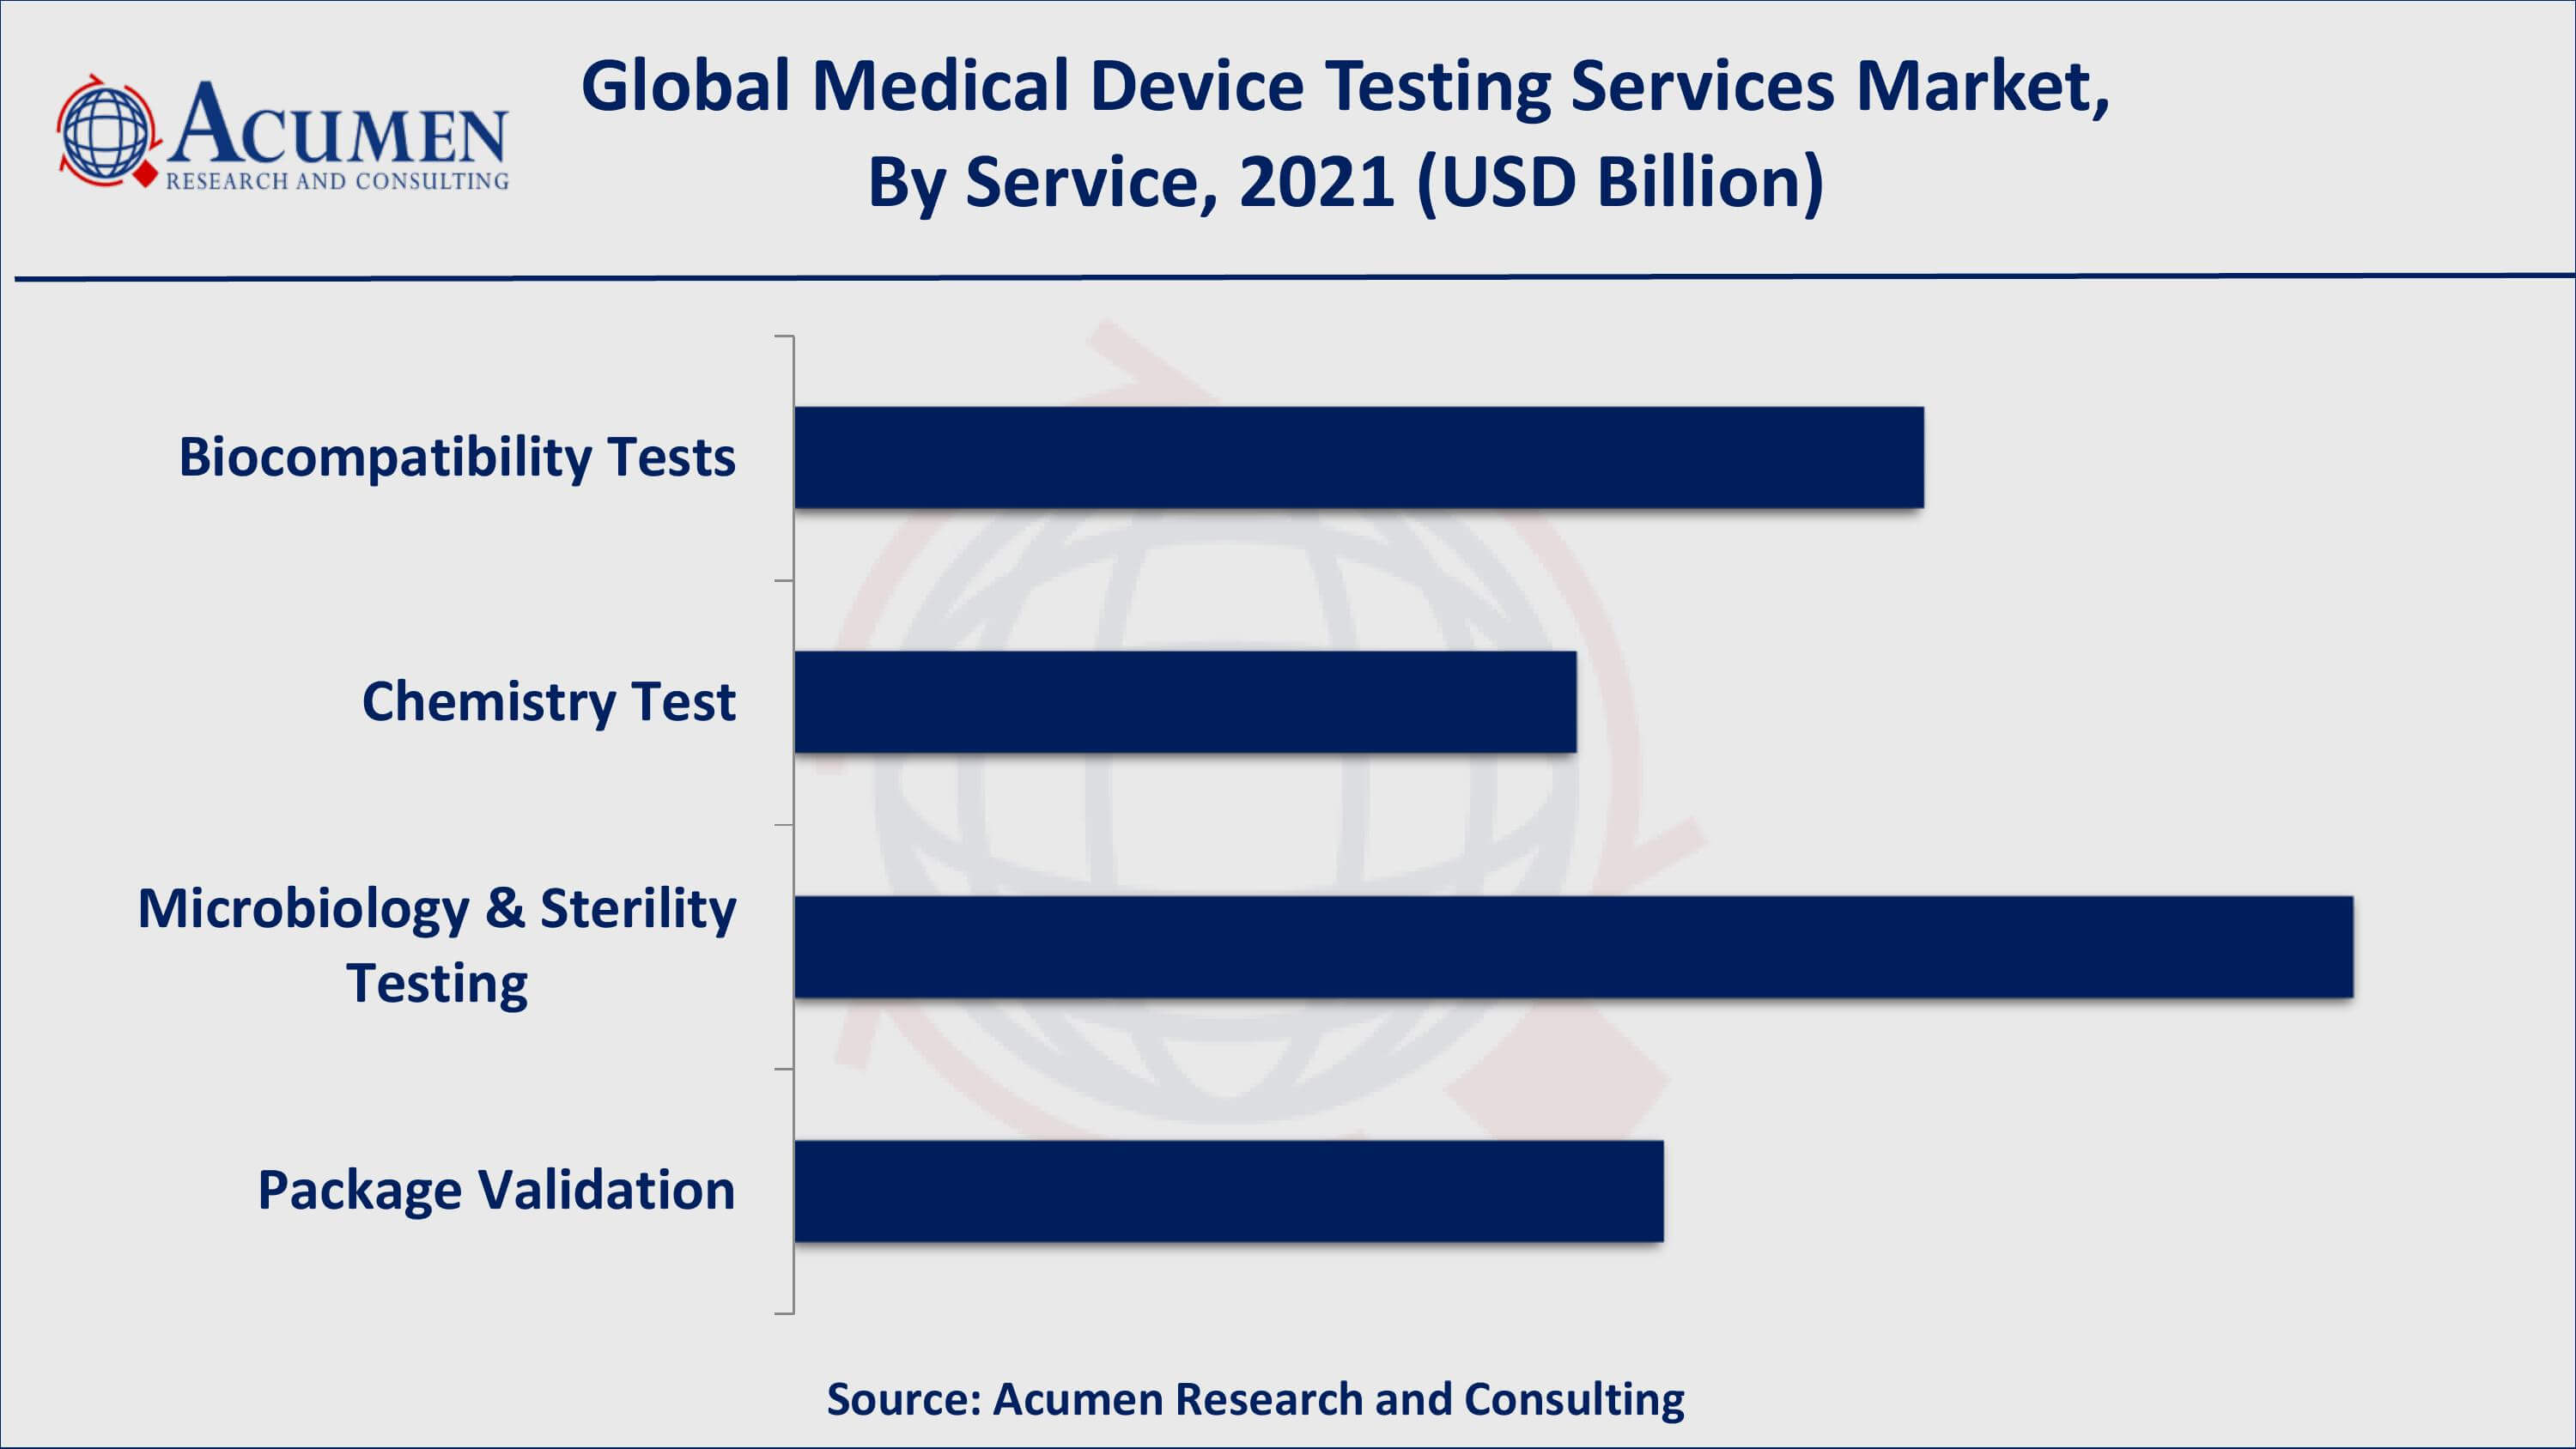 Based on service, microbiology & sterility testing captured over 35% of the overall market share in 2021